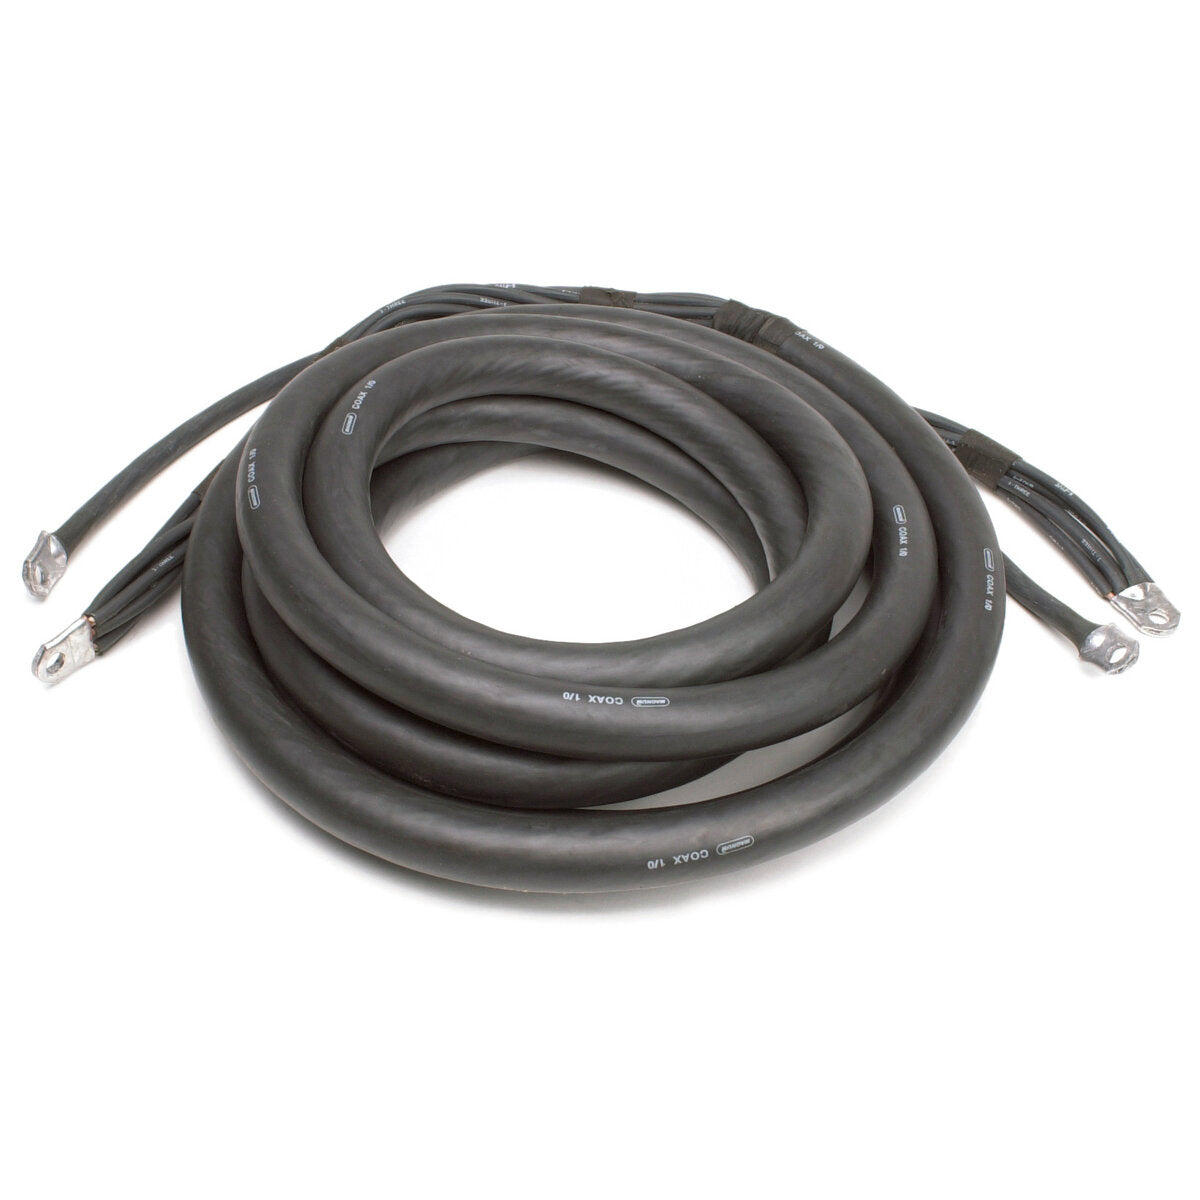 Lincoln Electric - Coaxial Weld Power Cable (1/0, 350A, 60%) - 25 ft (7.6 m) - K1796-25